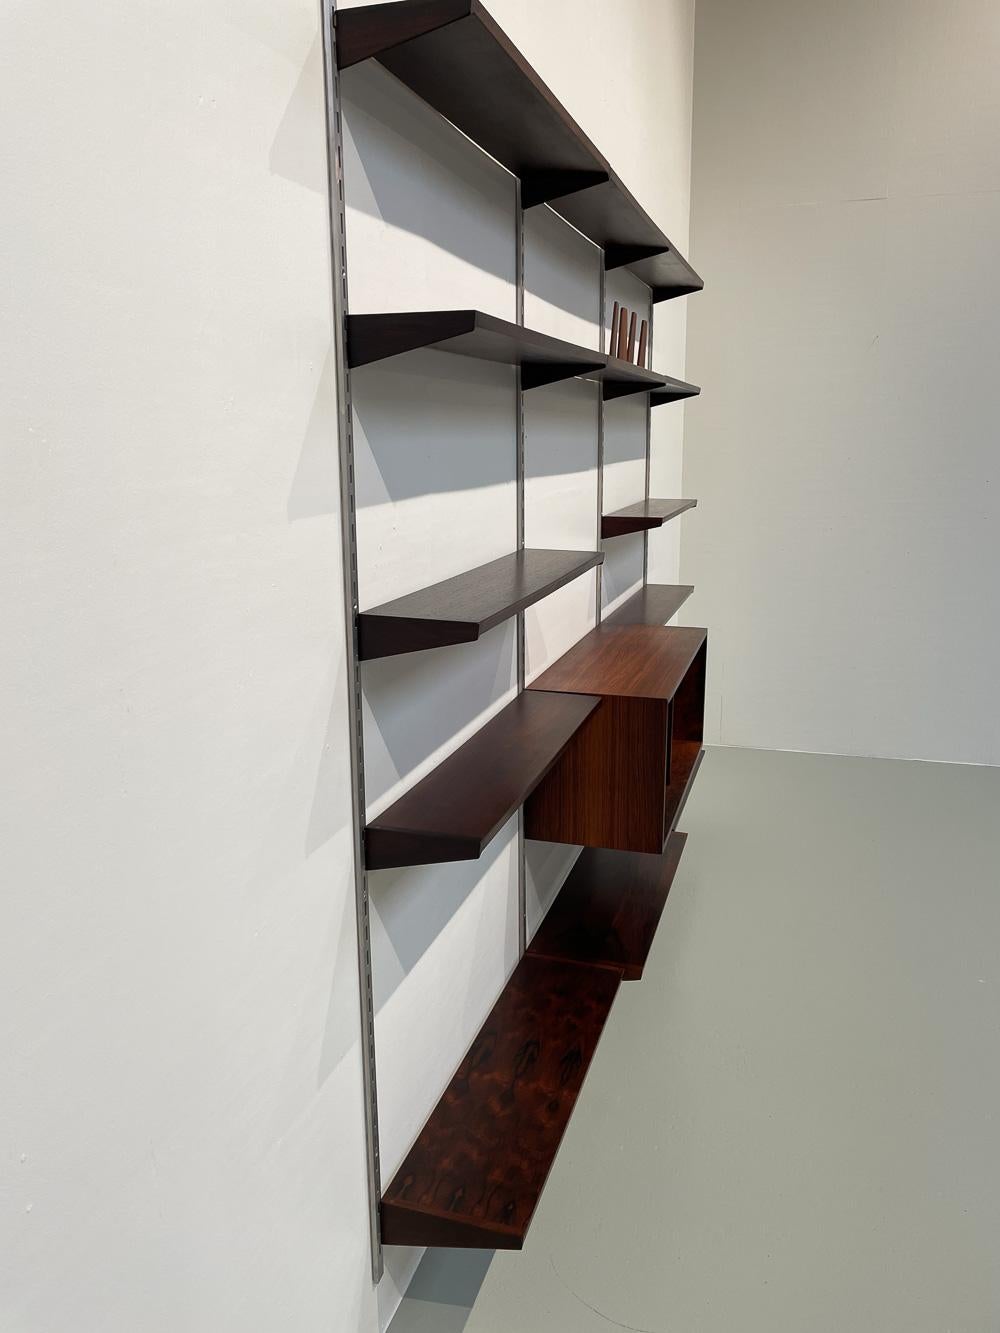 Mid-20th Century Vintage Danish Rosewood 3-Bay Wall Unit by Kai Kristiansen for FM, 1960s For Sale